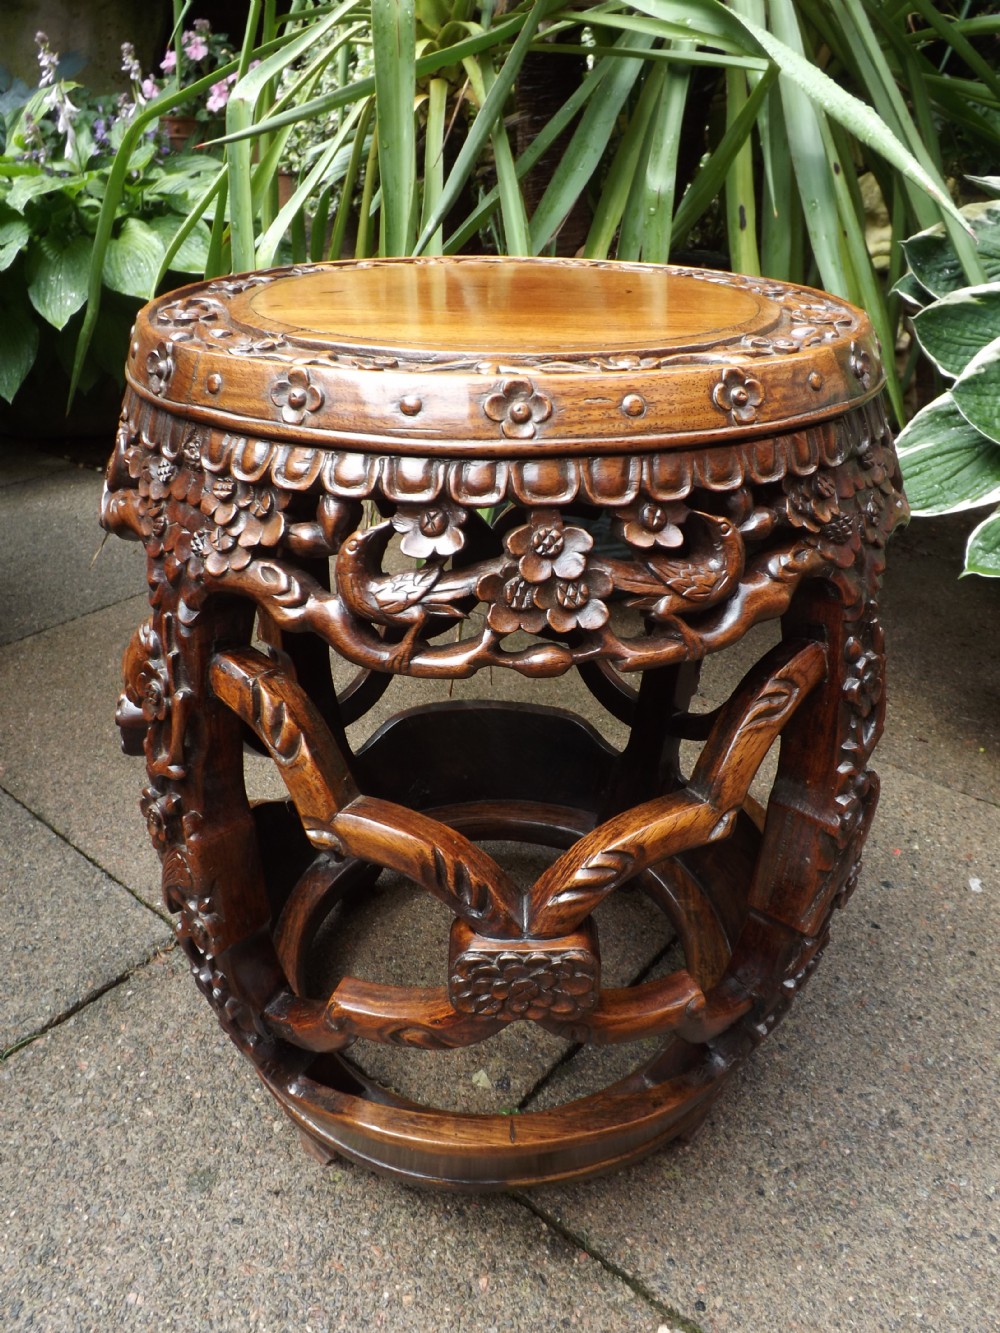 late c19th chinese qing dynasty heavily carved hardwood'hongmu' barrel stand or garden seat